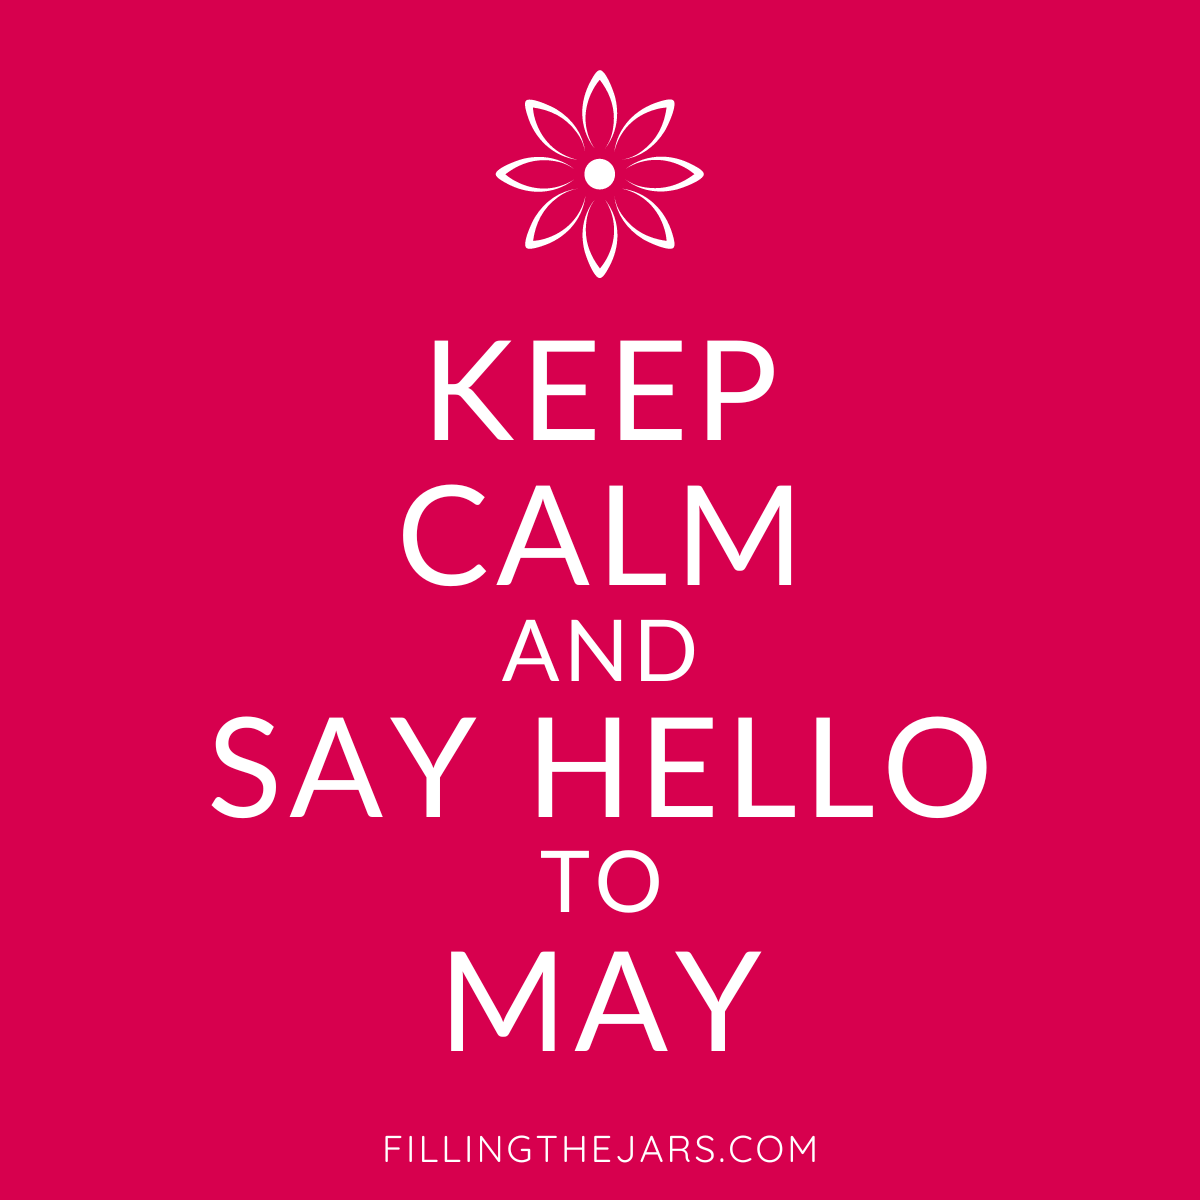 Hello May quote in white text on hot pink background.